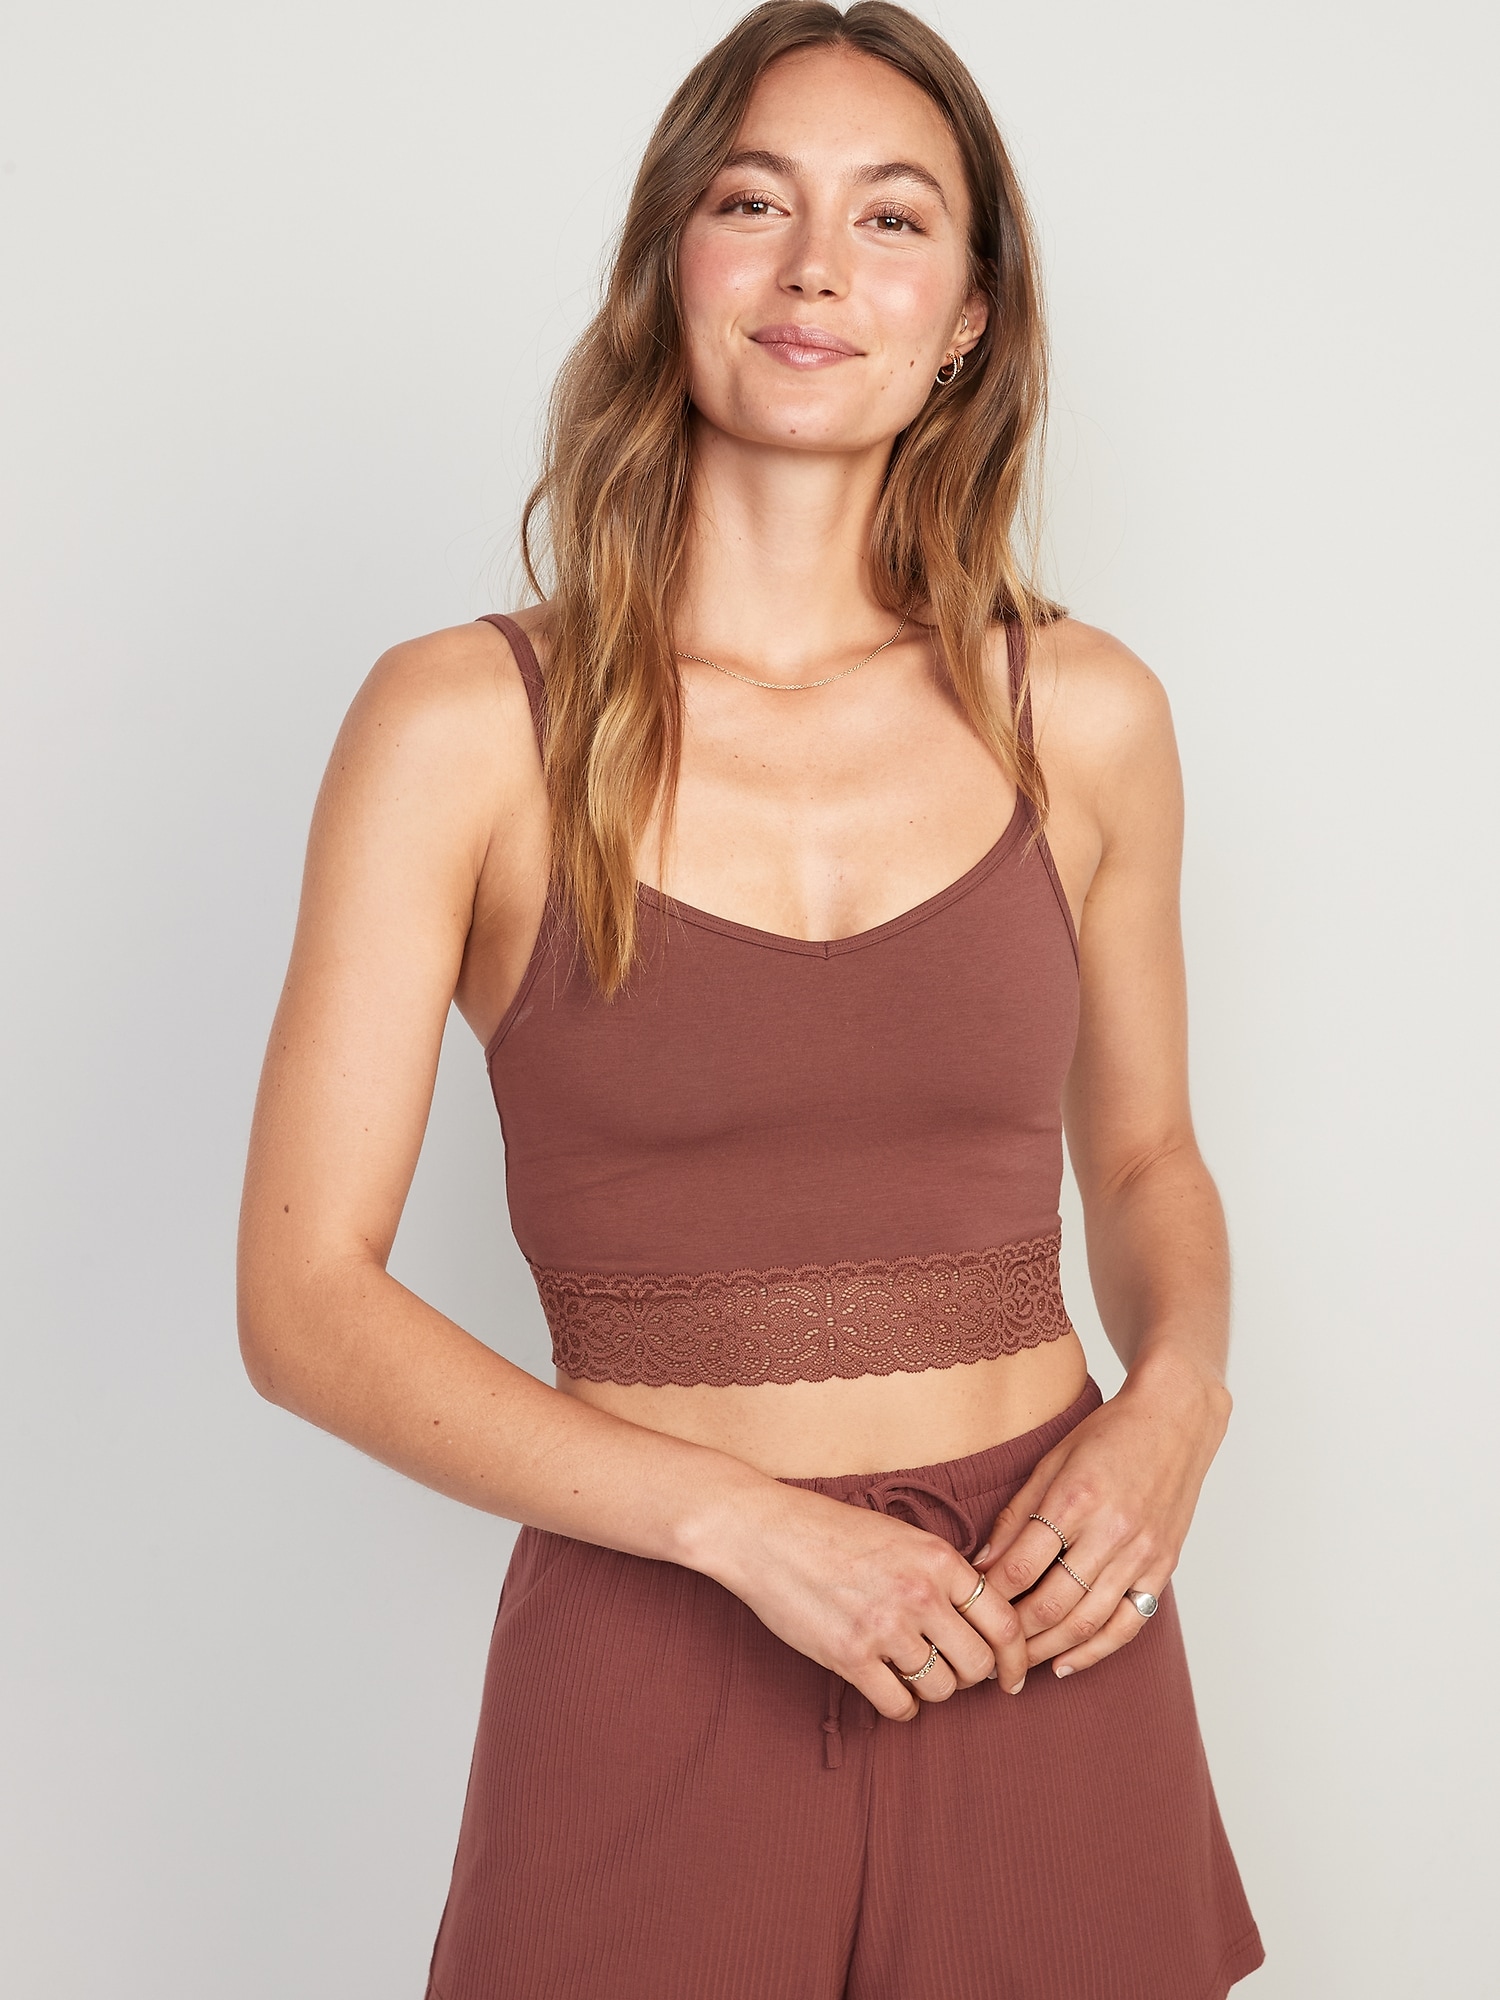 3 Cami Bra Package Deal/ Stretchy Hemp and Organic Cotton 